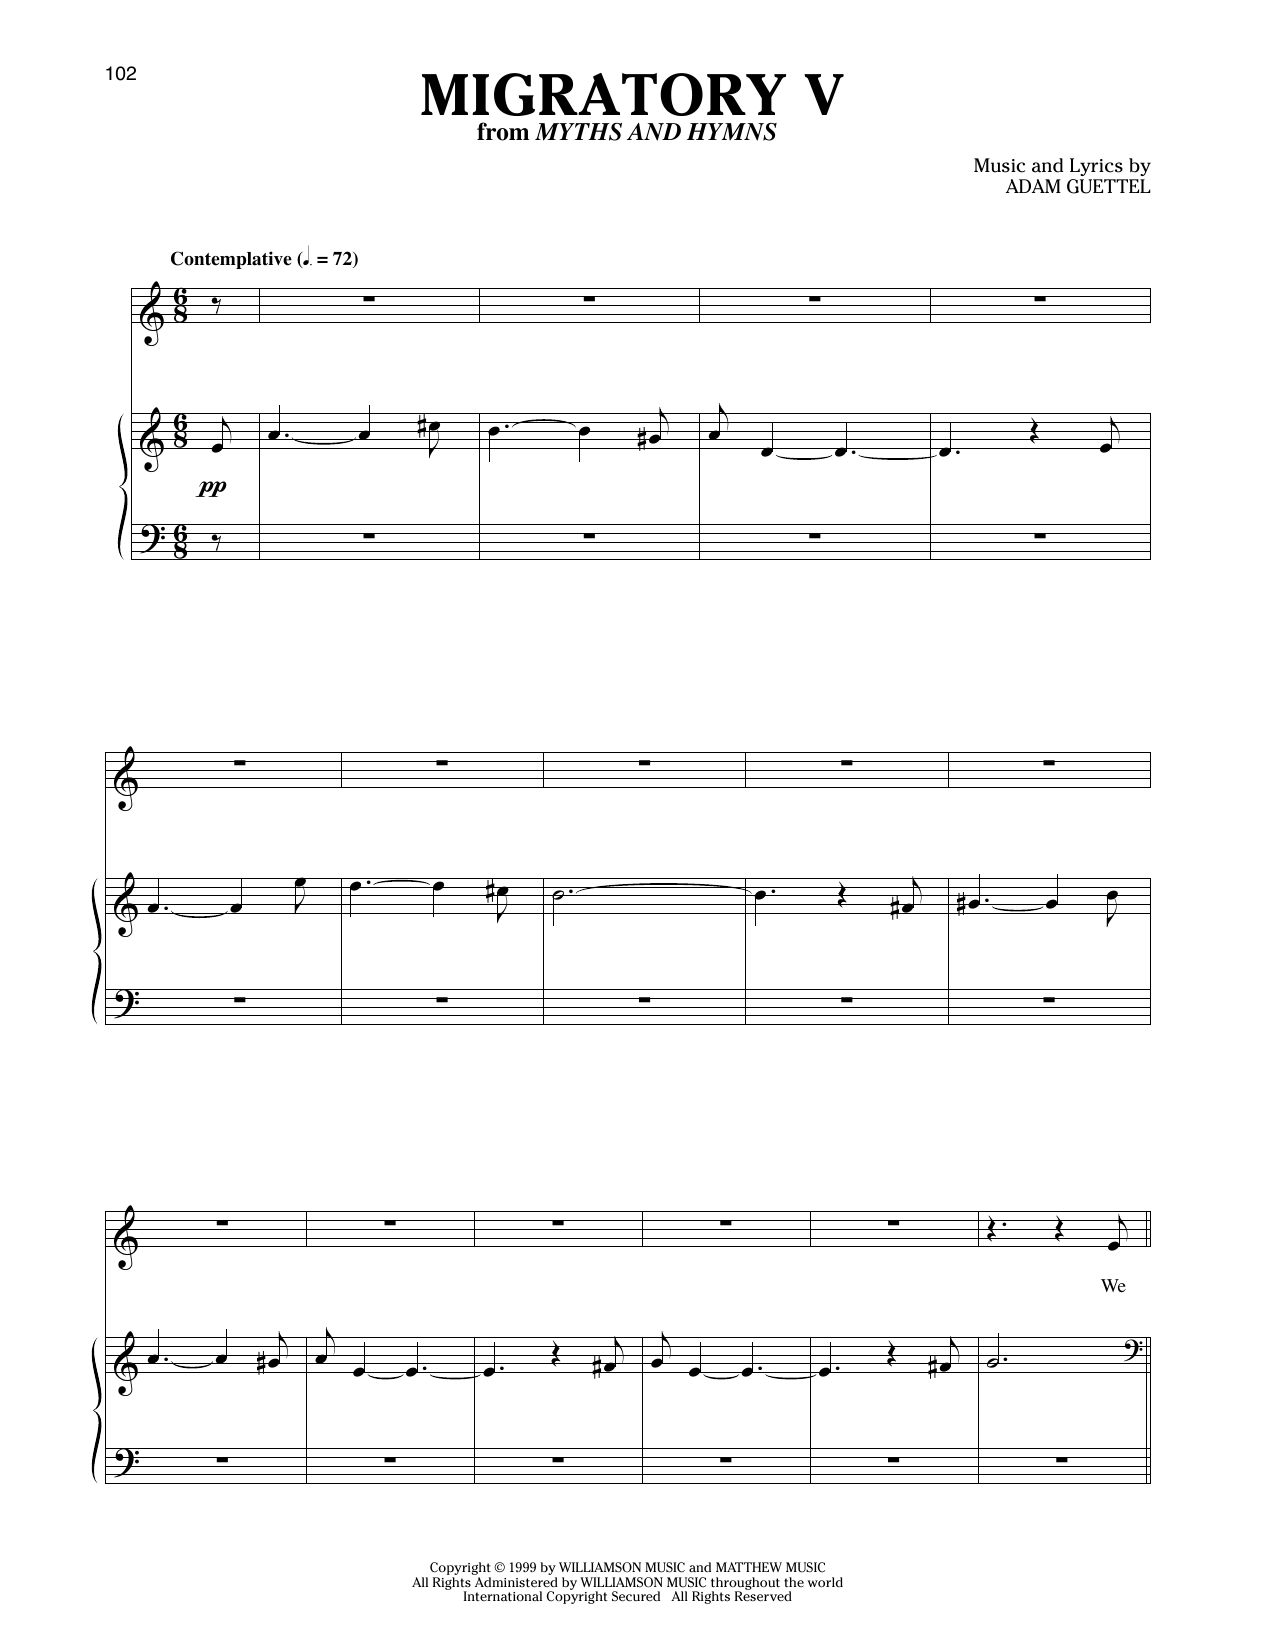 Adam Guettel Migratory V sheet music notes and chords. Download Printable PDF.